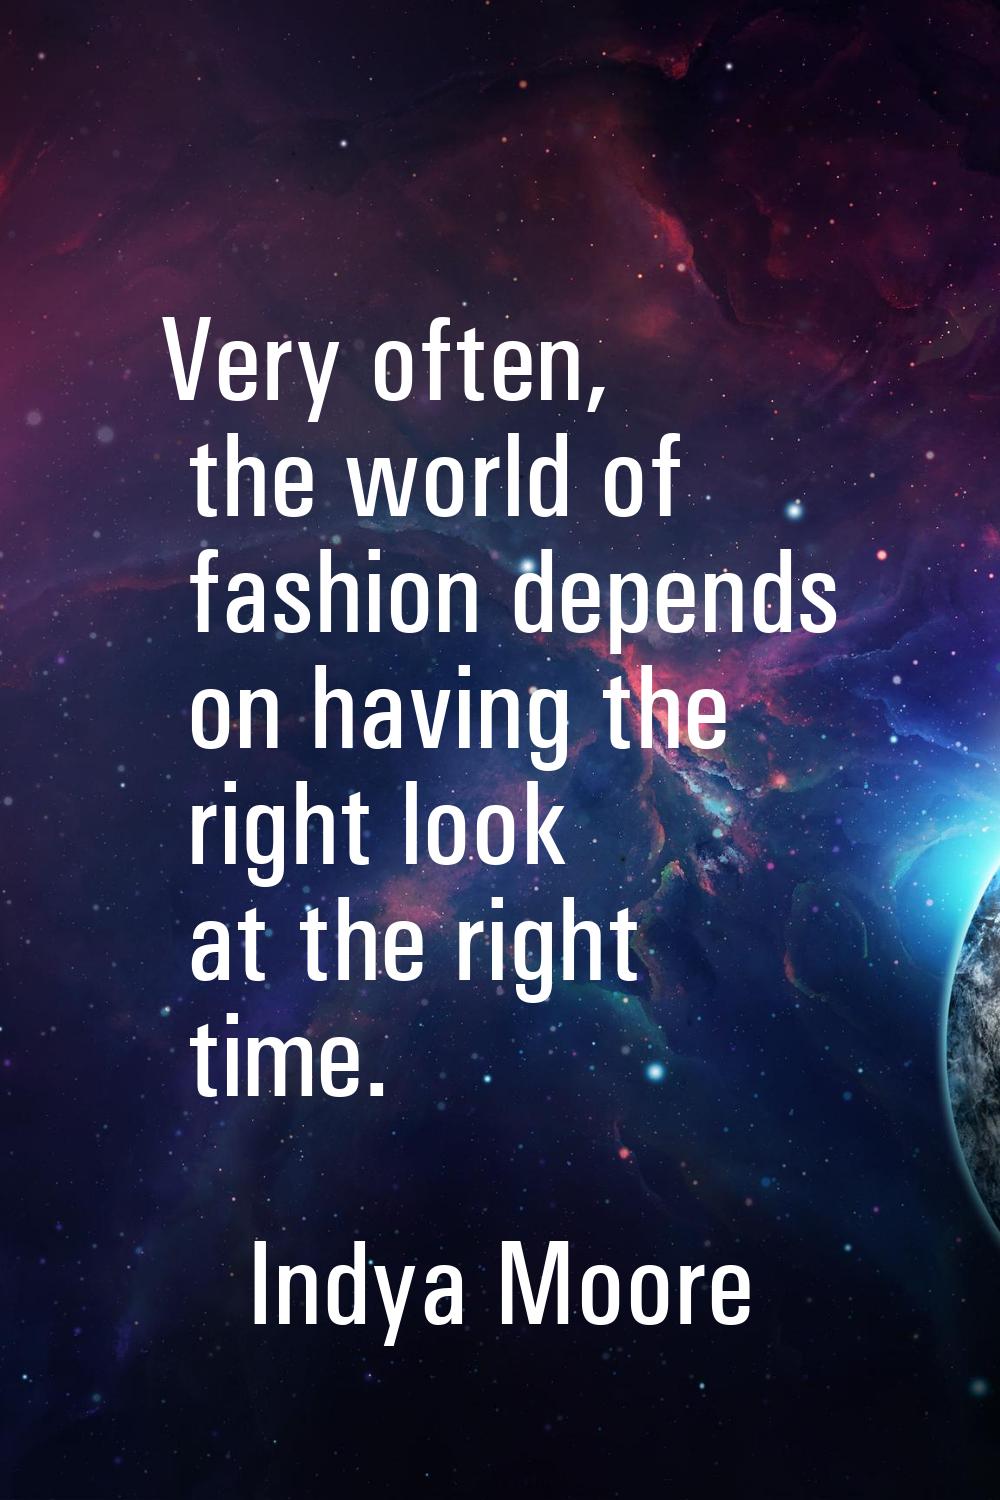 Very often, the world of fashion depends on having the right look at the right time.